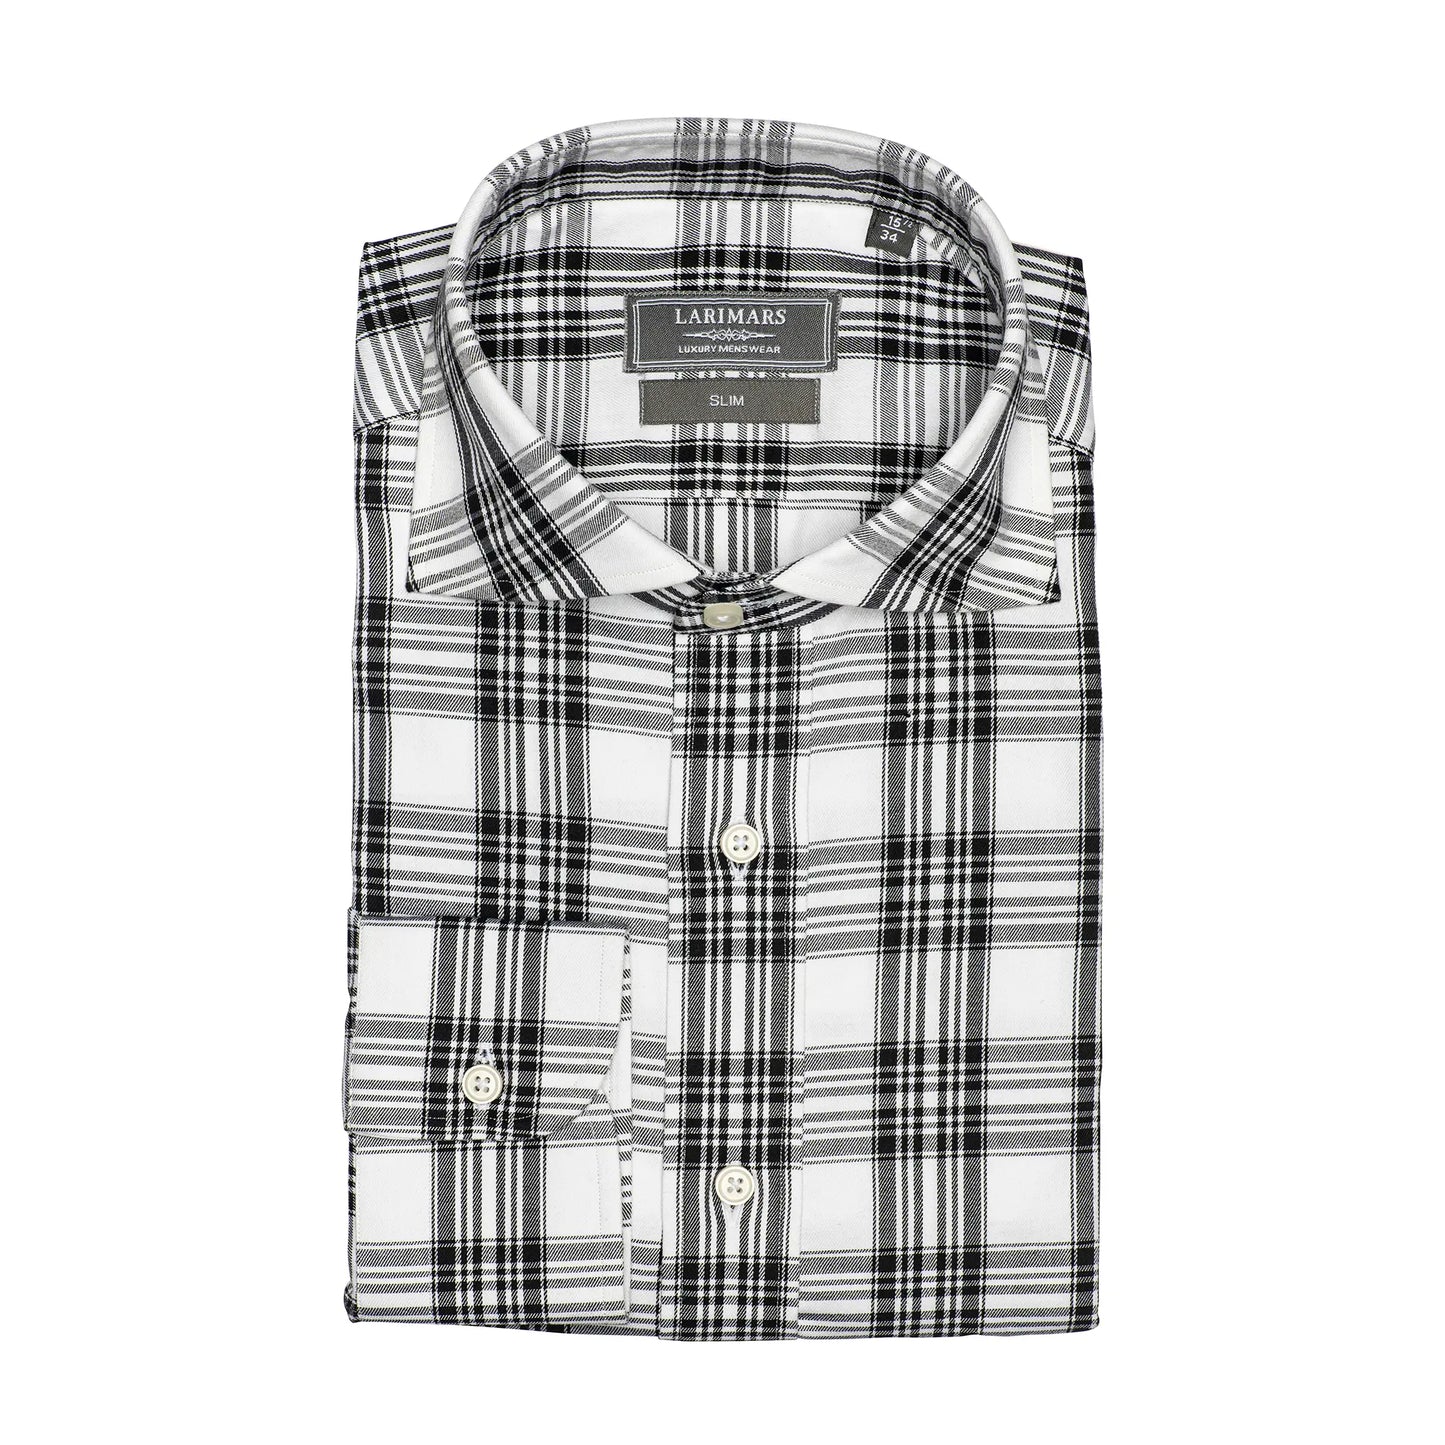 Black & White Plaid - Larimars Clothing Men's Formal and casual wear shirts